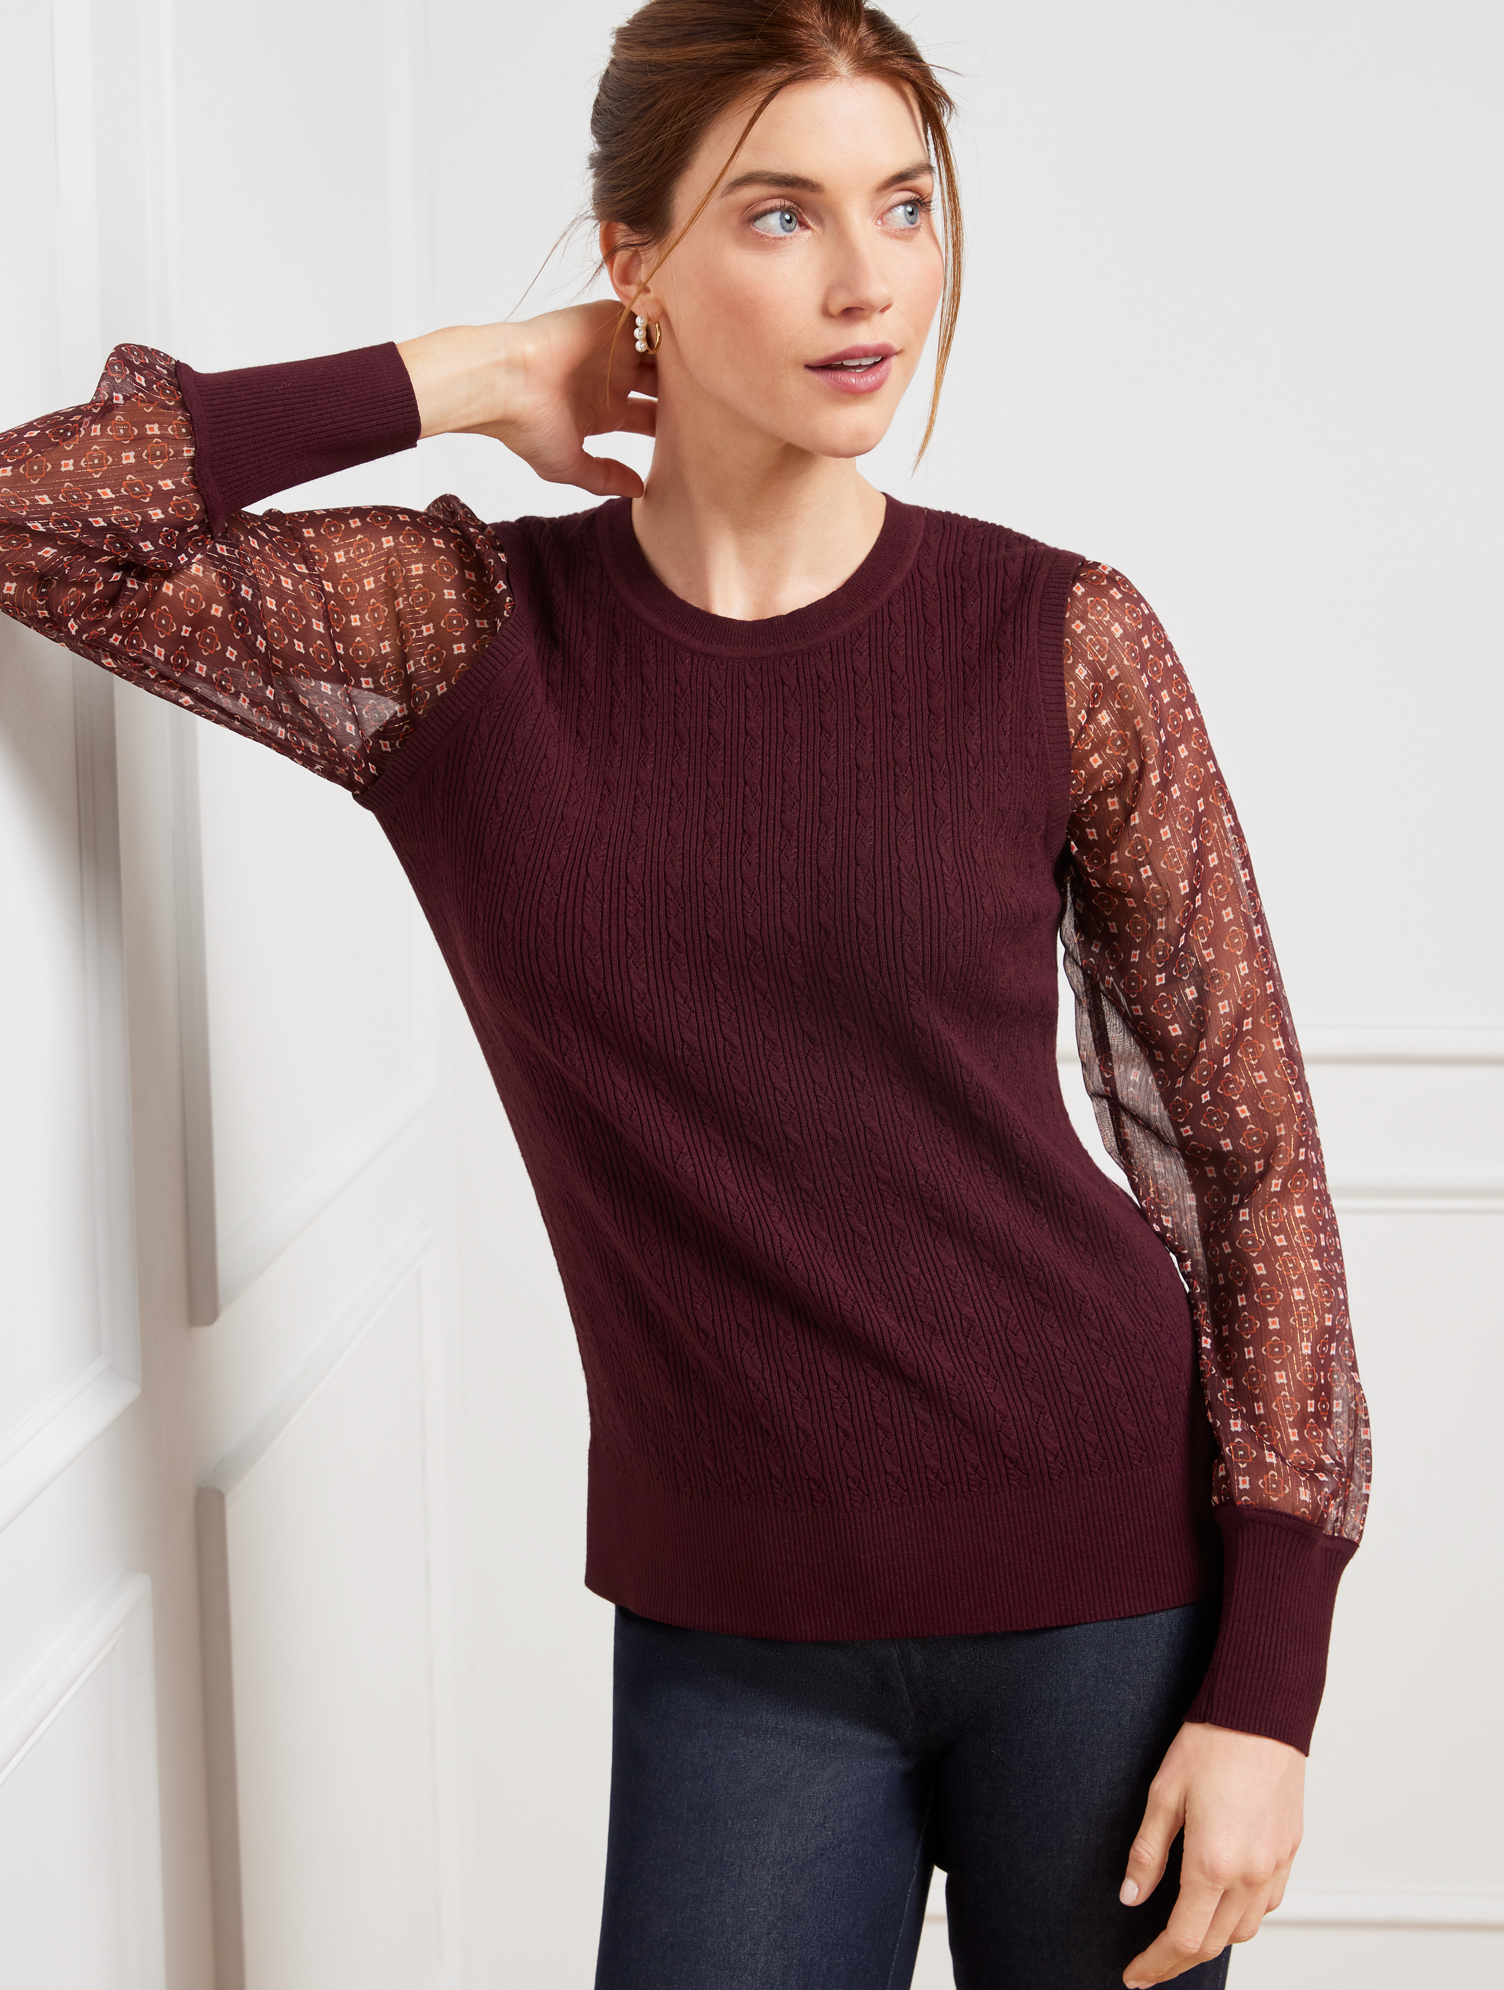 Talbots Woven Sleeve Crewneck Sweater Pullover - Printed - Rich Burgundy - Small